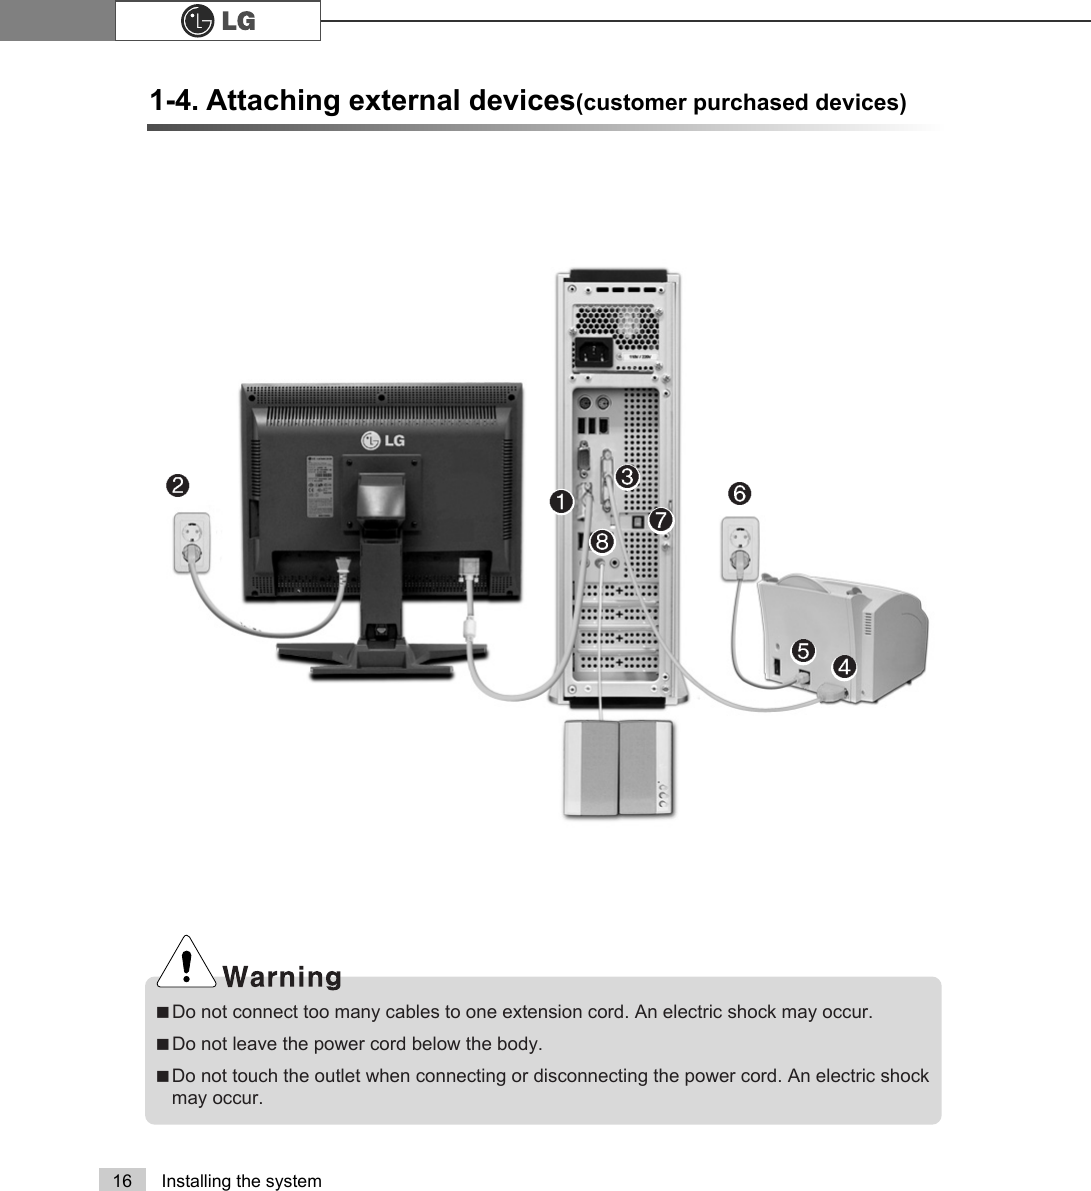 16 Installing the system1-4. Attaching external devices(customer purchased devices)ℙℚℜℛℝ℟℞℘ãDo not connect too many cables to one extension cord. An electric shock may occur.ãDo not leave the power cord below the body.ãDo not touch the outlet when connecting or disconnecting the power cord. An electric shockmay occur.